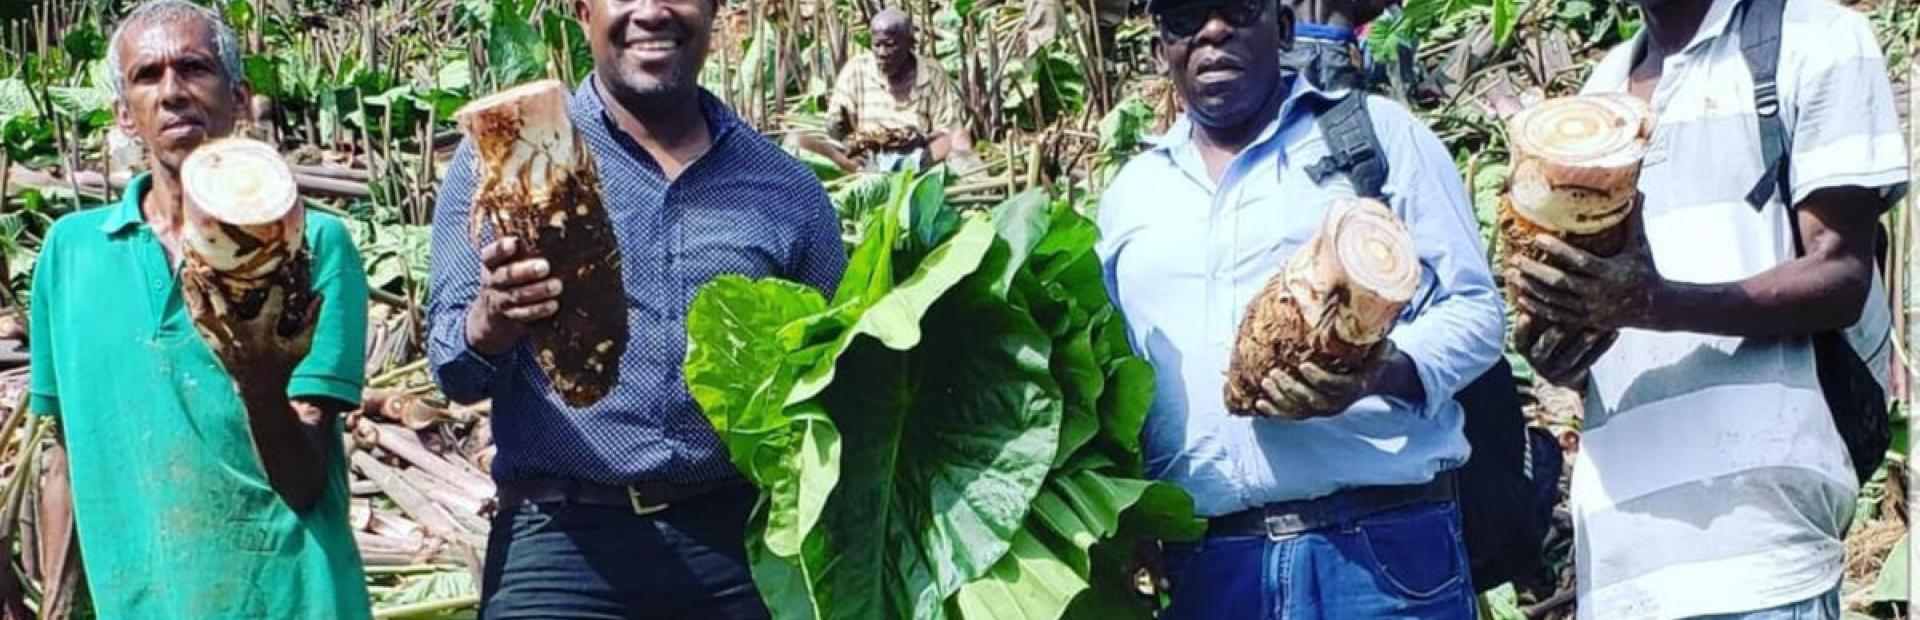 Taro, also known as malanga in some Latin American countries, has been key lately to diversify the agriculture of this island country.